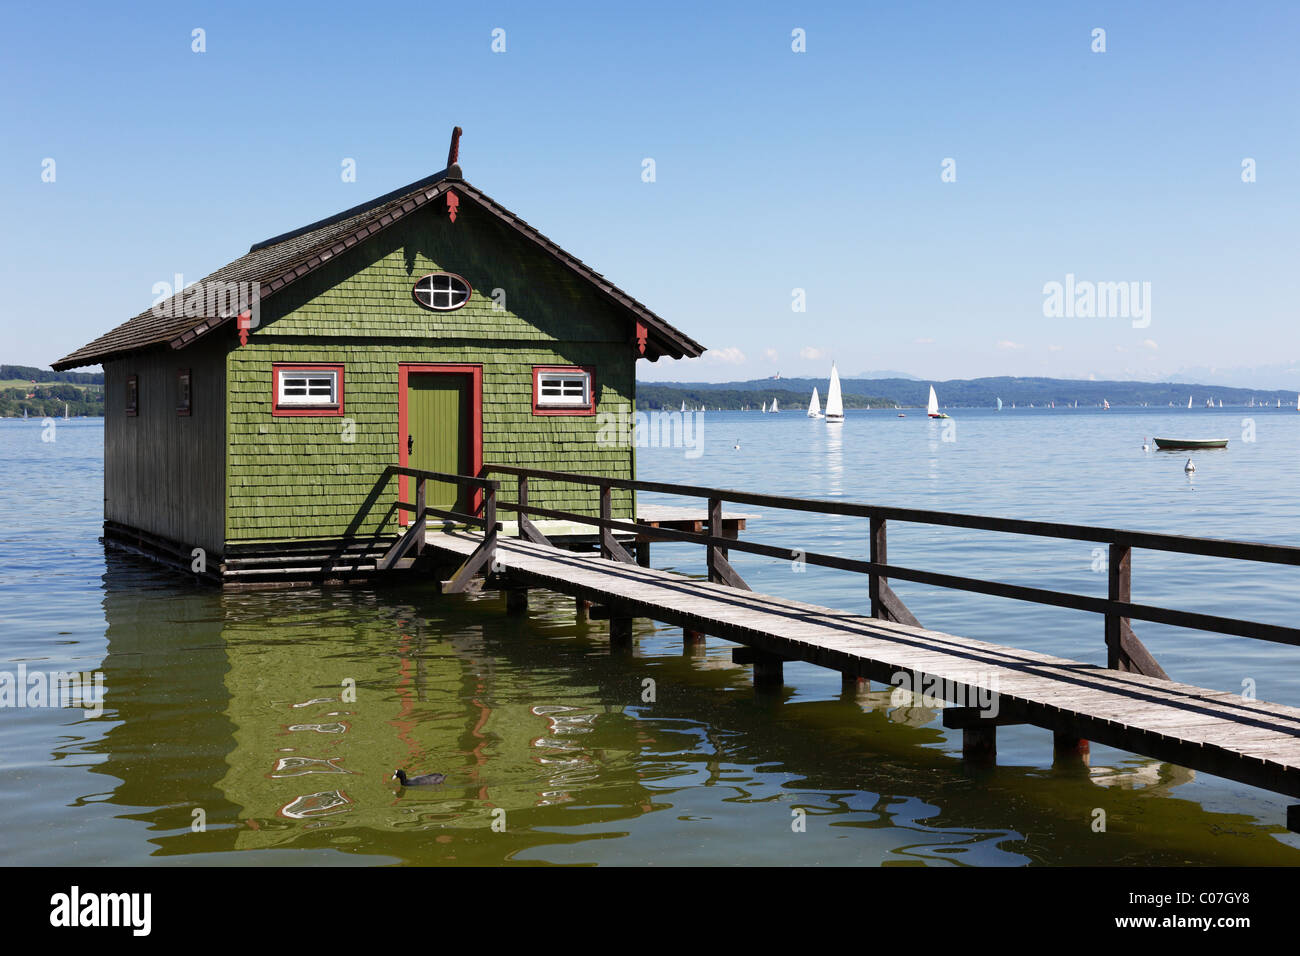 Boathouse, Ammersee lake, Schondorf, Fuenfseenland or Five Lakes region, Upper Bavaria, Bavaria, Germany, Europe Stock Photo